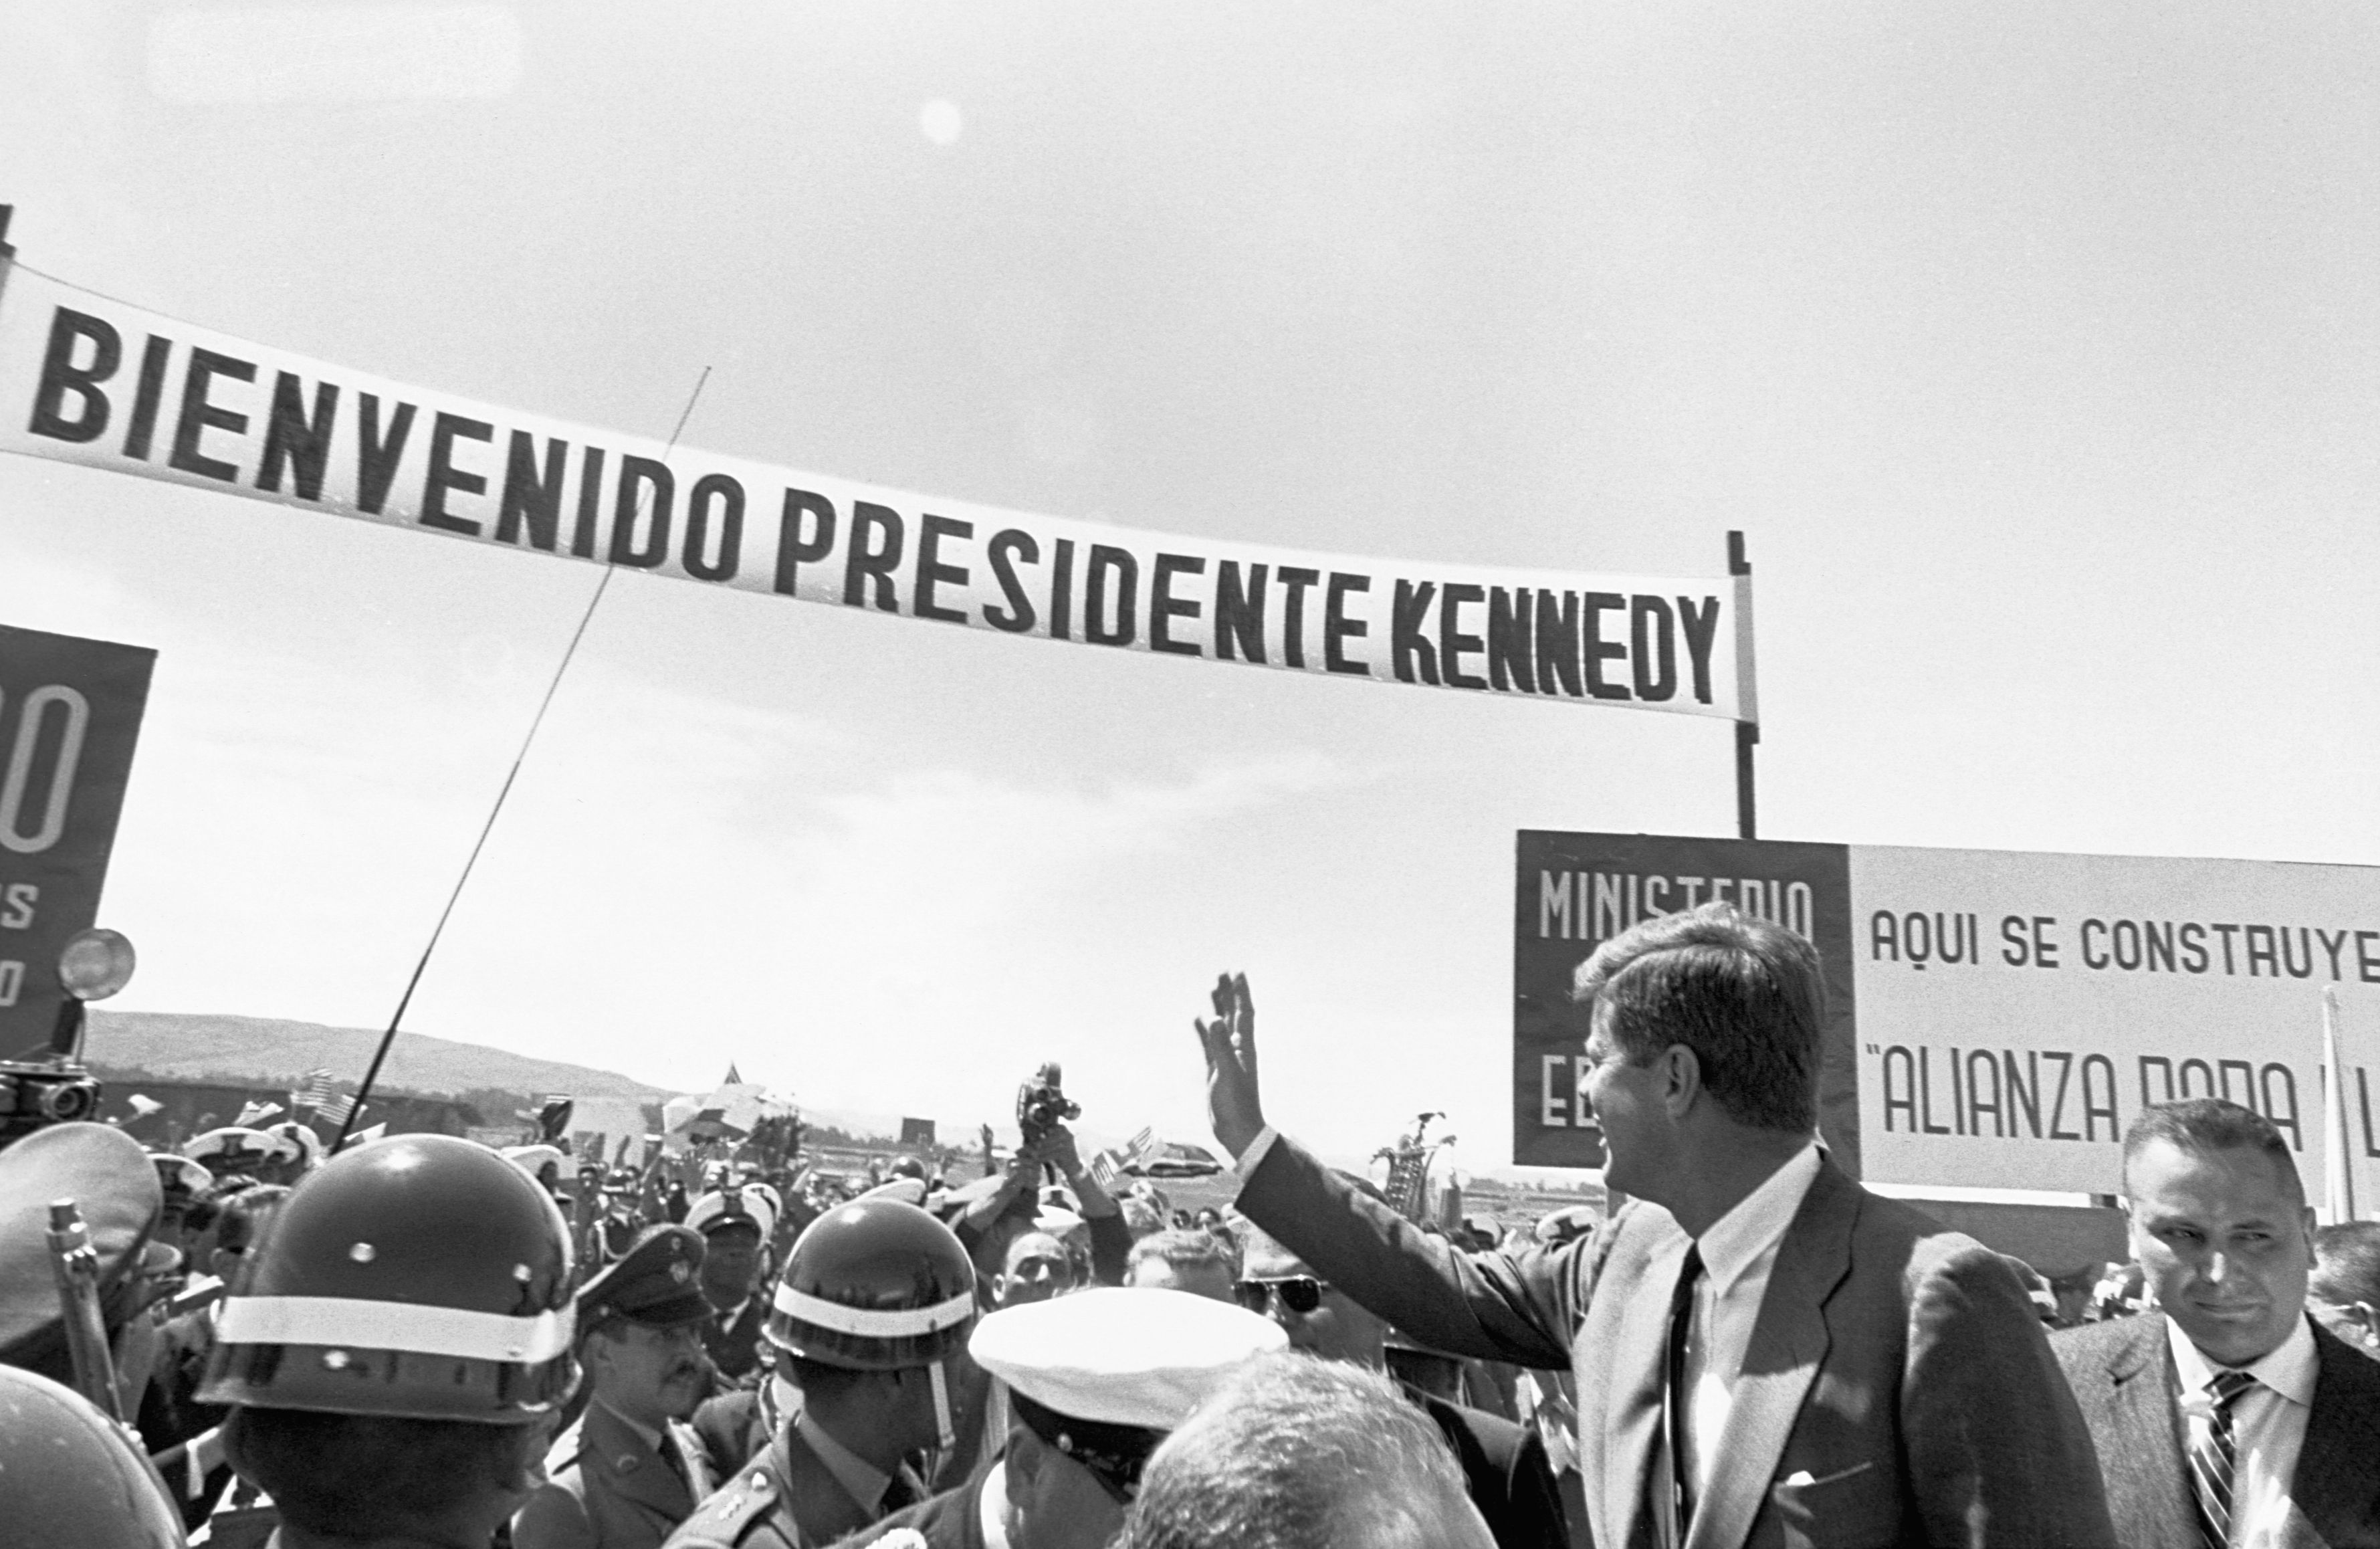 President John F. Kennedy waves to a crowd while on a visit to Venezuela, December 16, 1961.